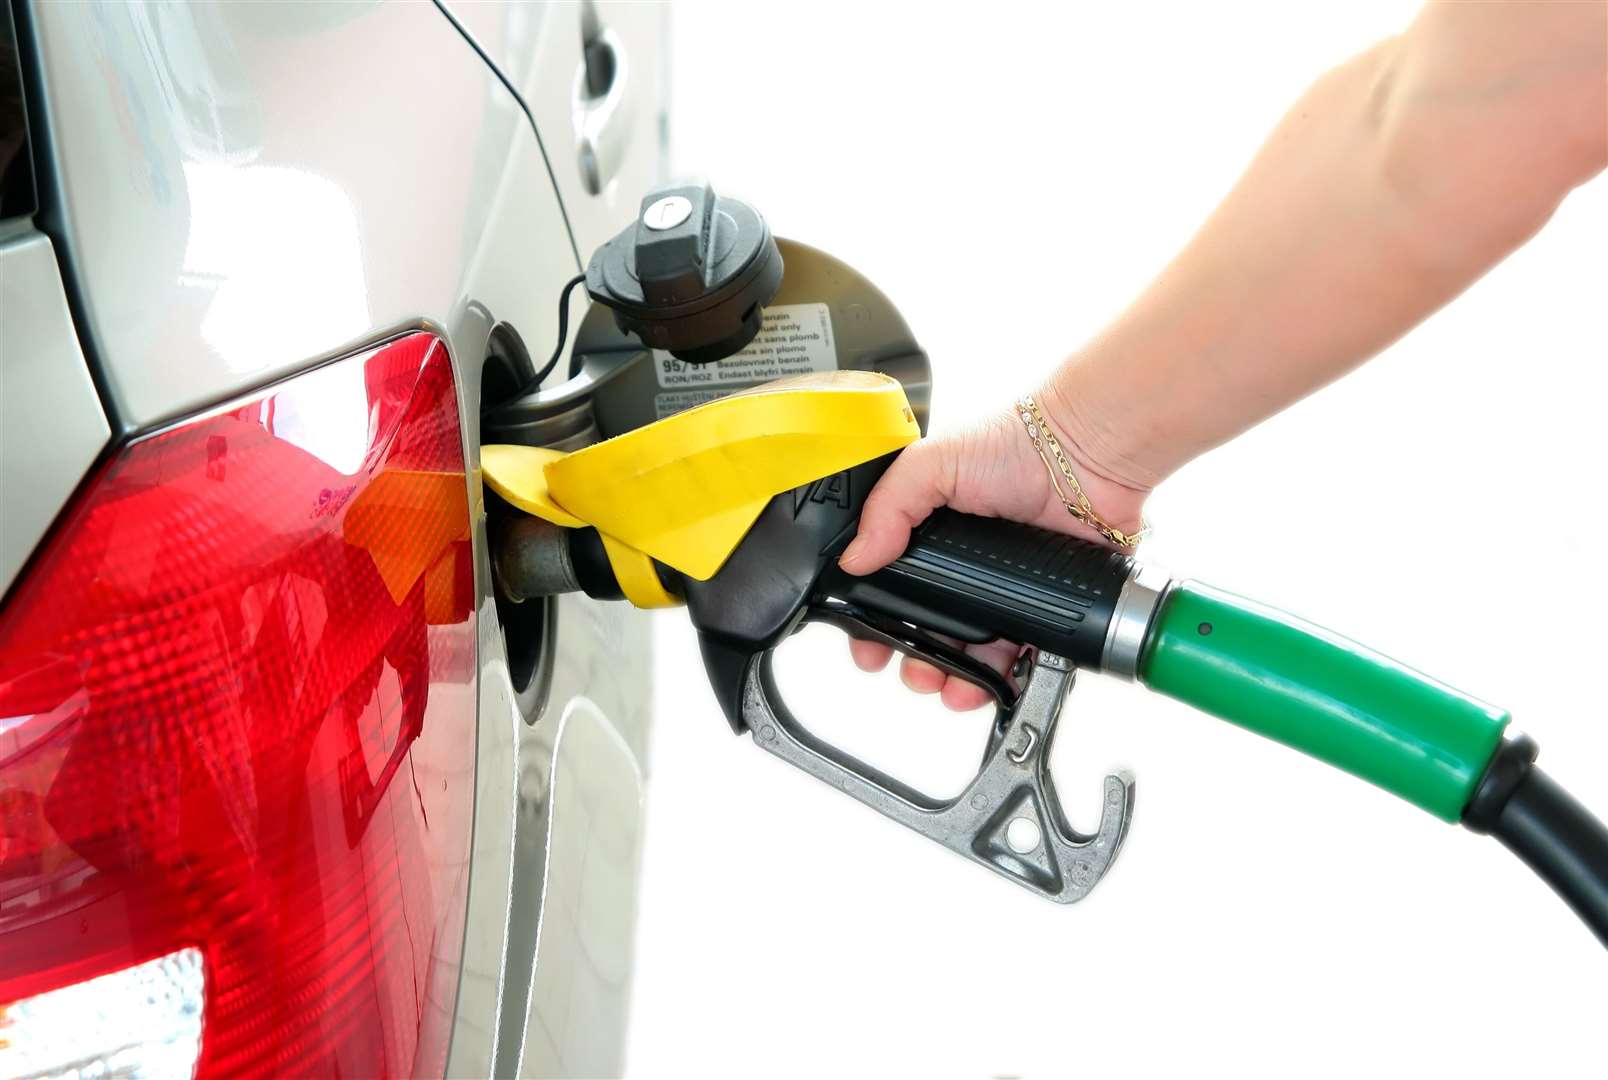 Motoring experts suggest shopping around for the best price at the pump.